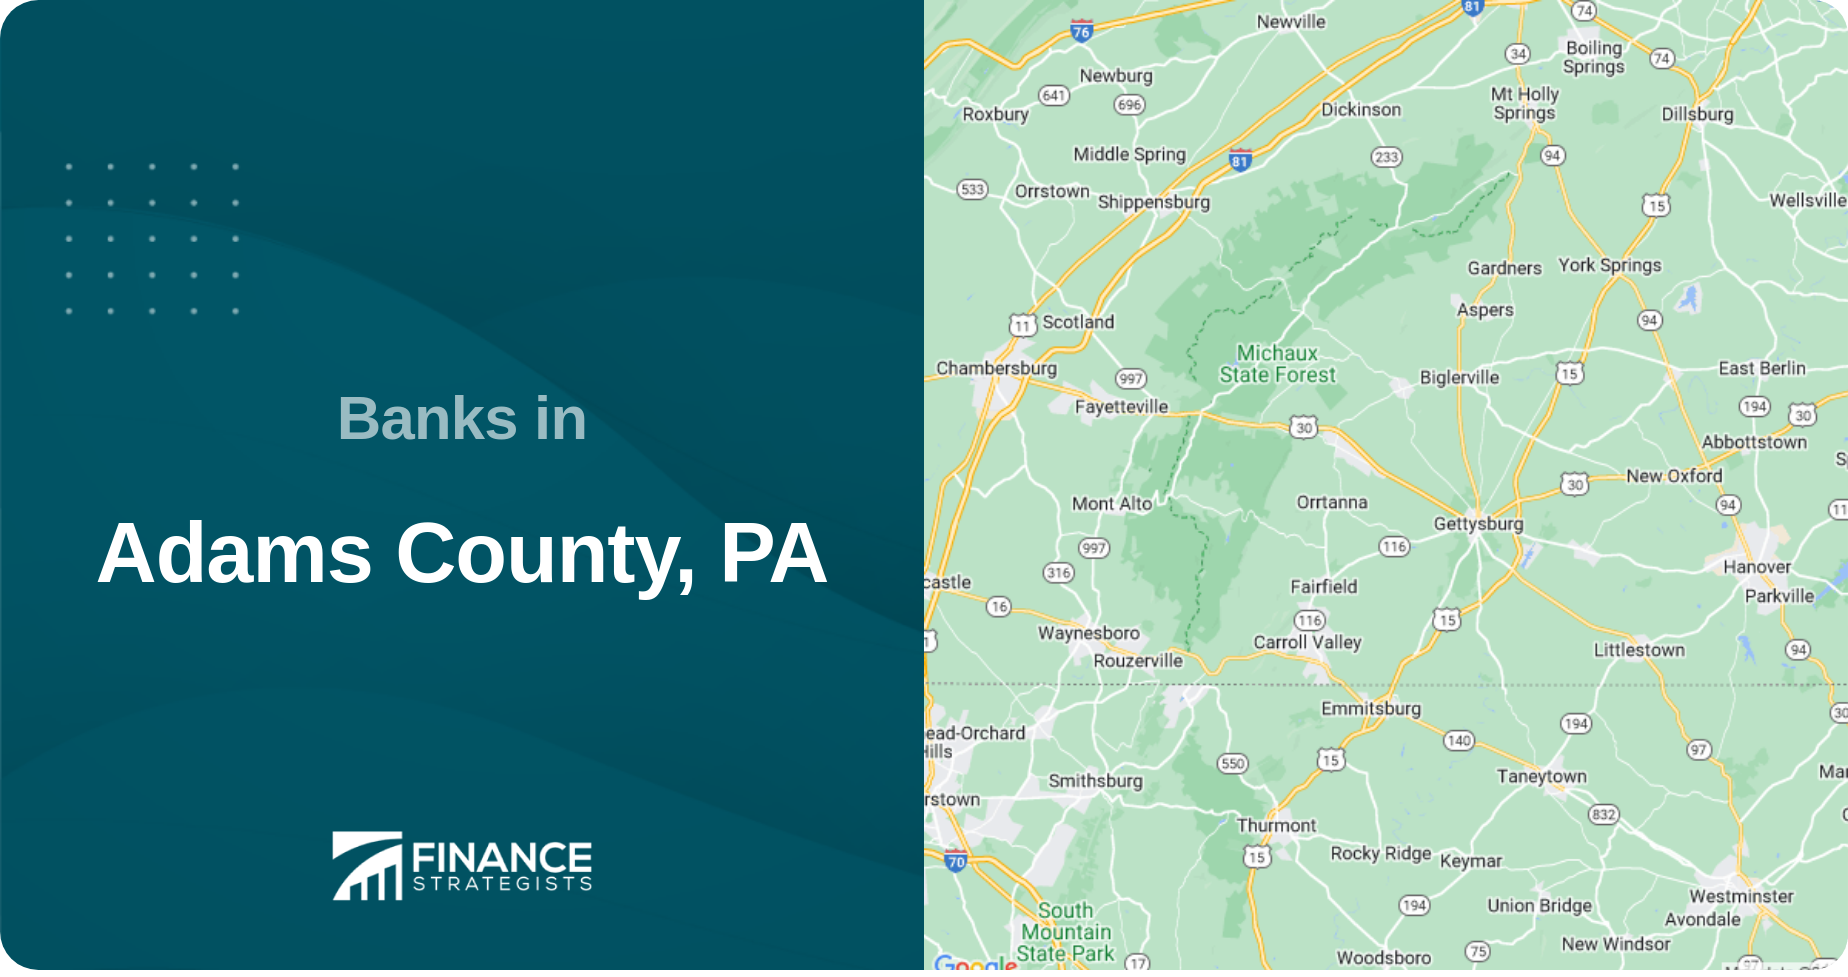 Banks in Adams County, PA